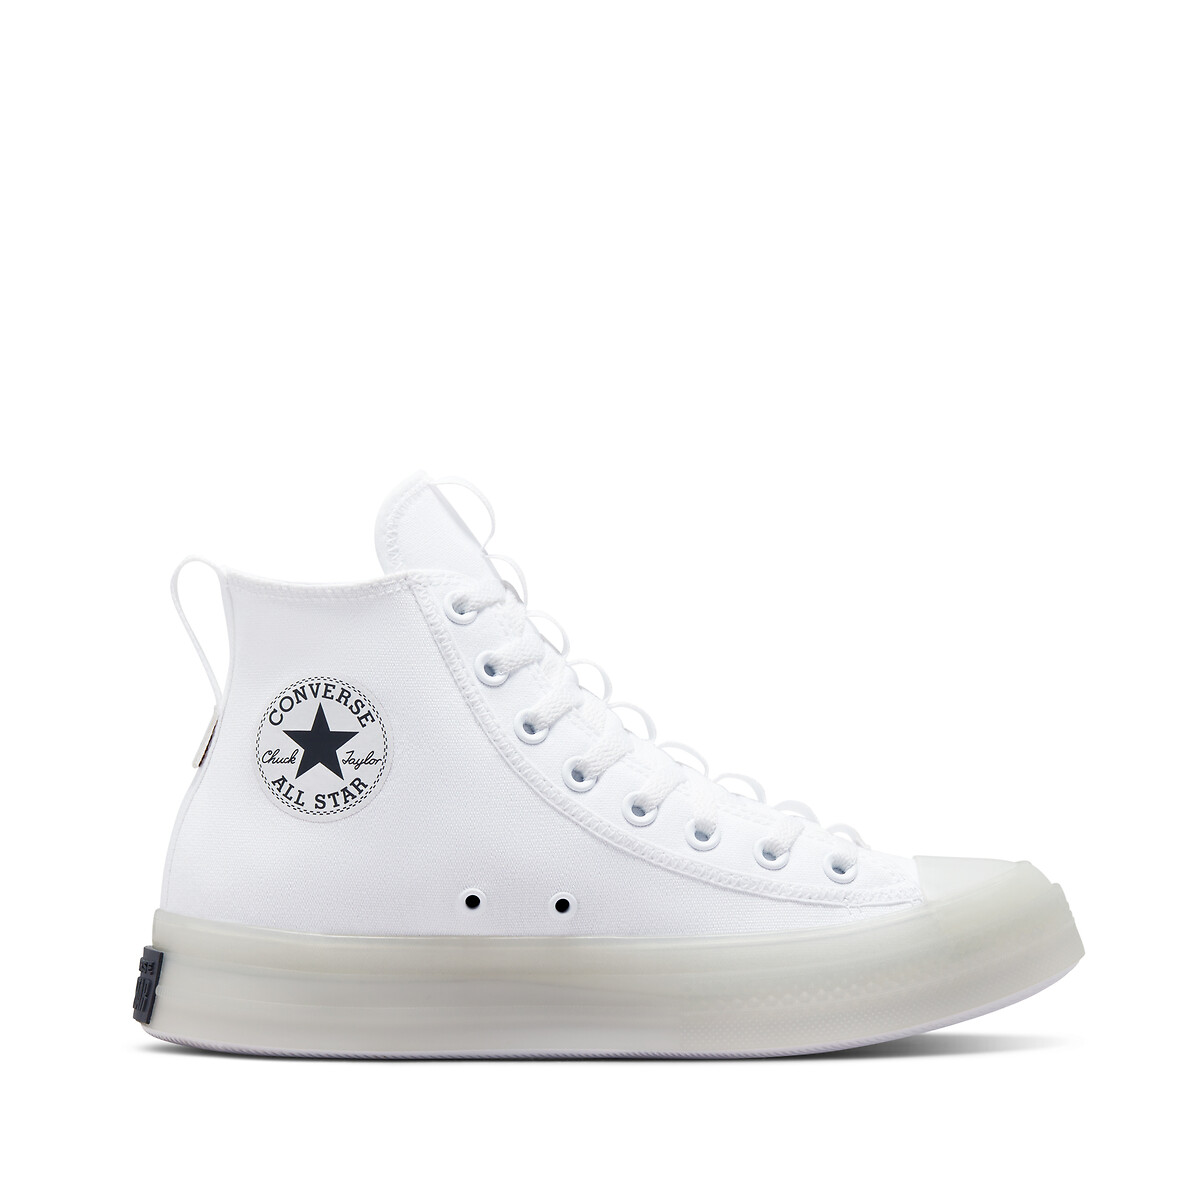 Image of All Star Explore Future Comfort Canvas High Top Trainers